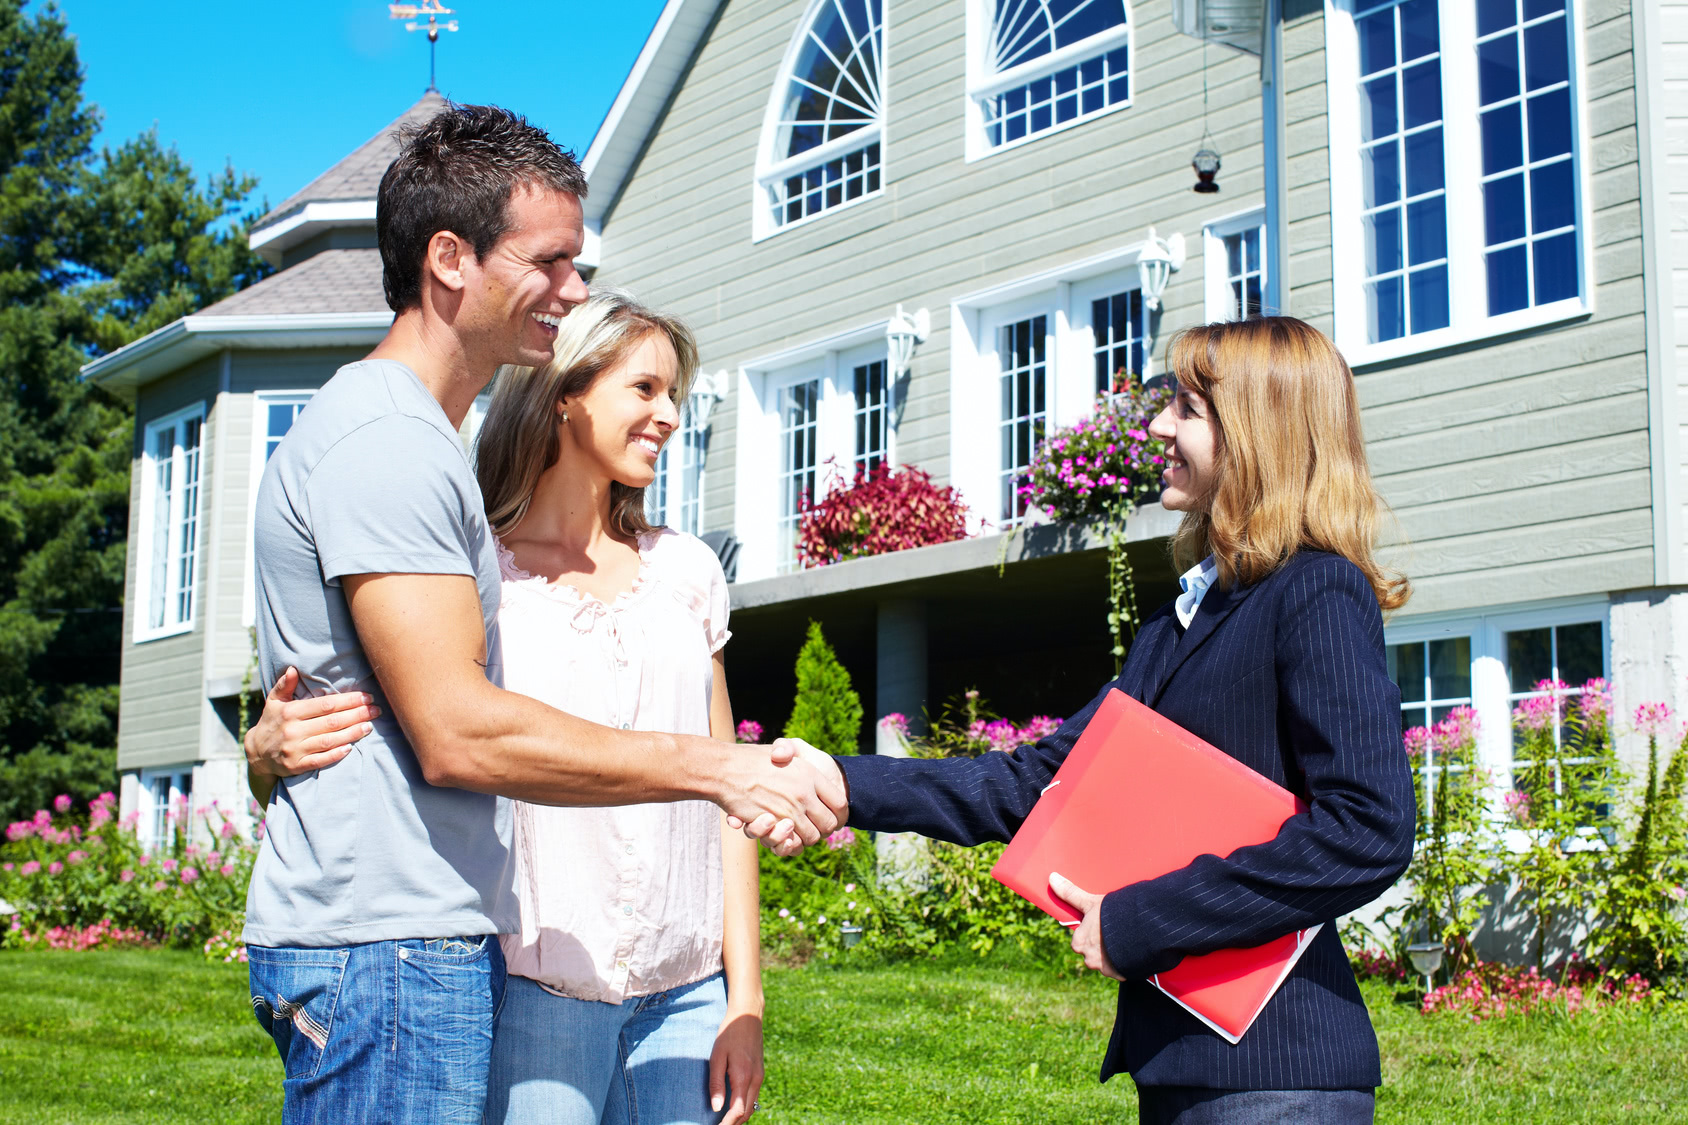 When purchasing a home, does the home insurance need to be in place prior to closing on the home?